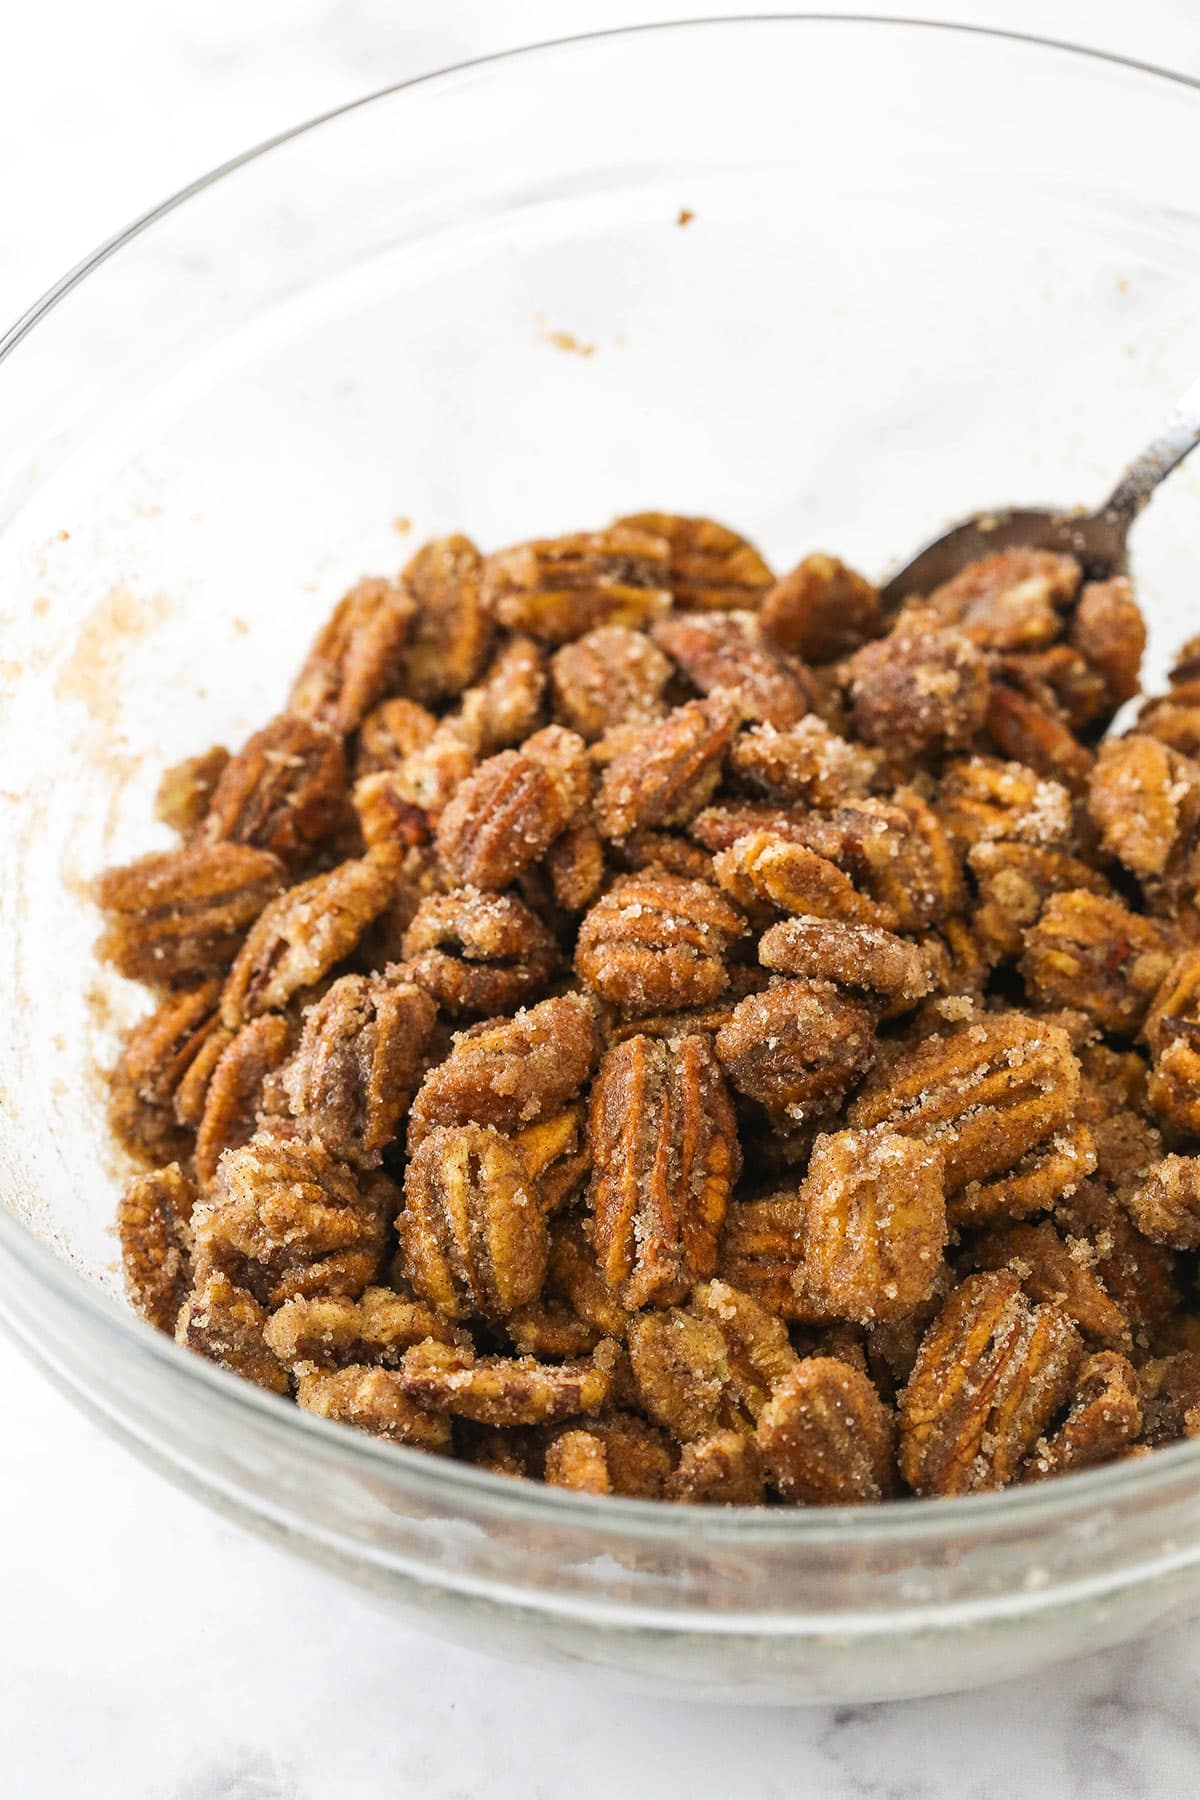 A bowl of pecans coated evenly in both the egg white and sugar mixtures